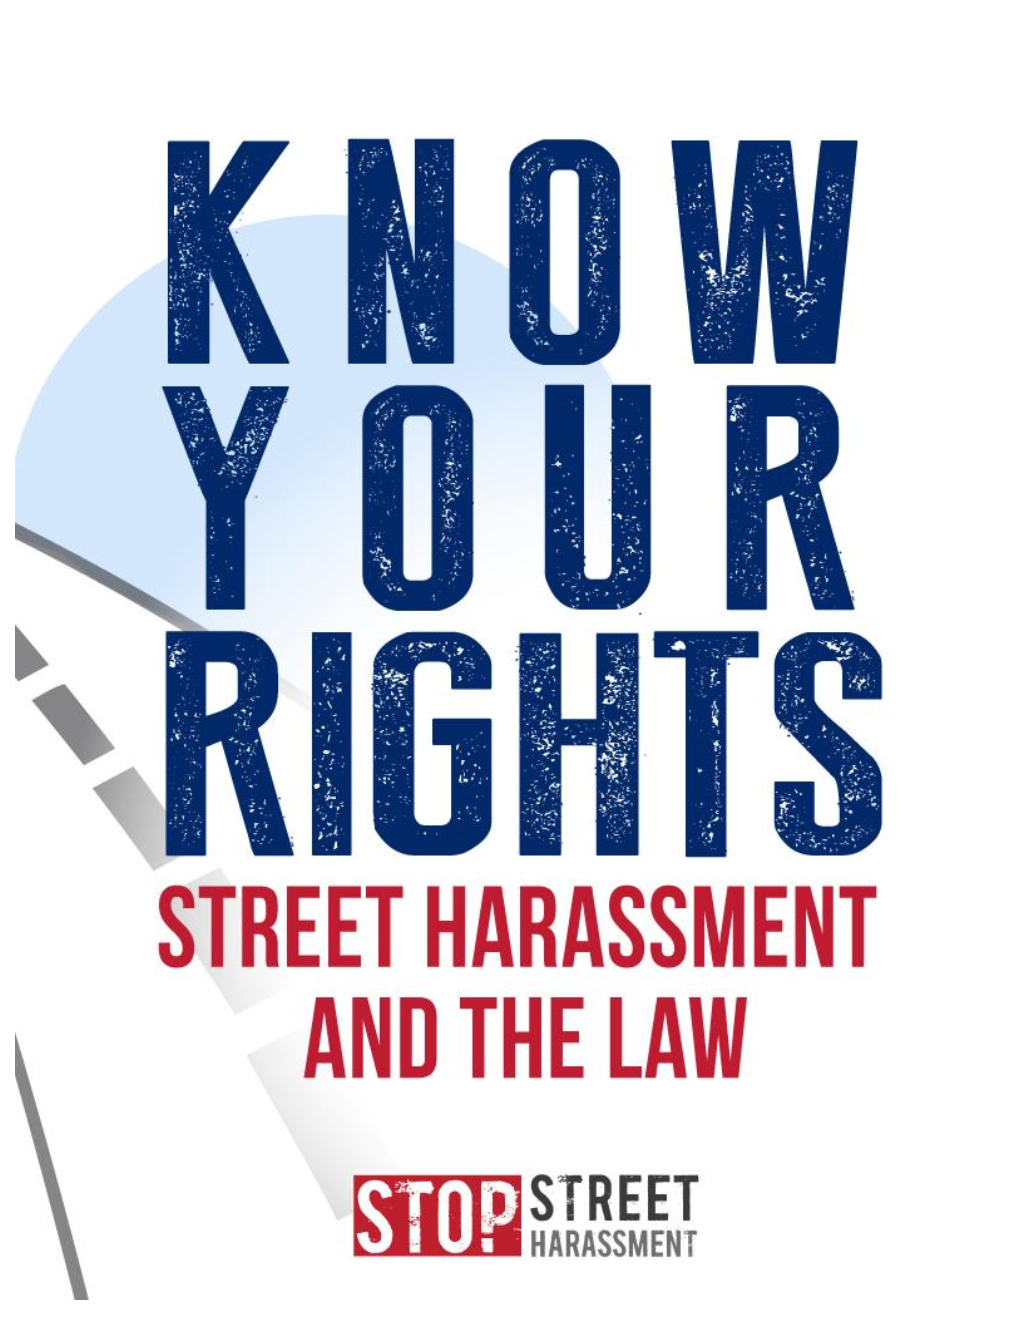 Street Harassment and the Law